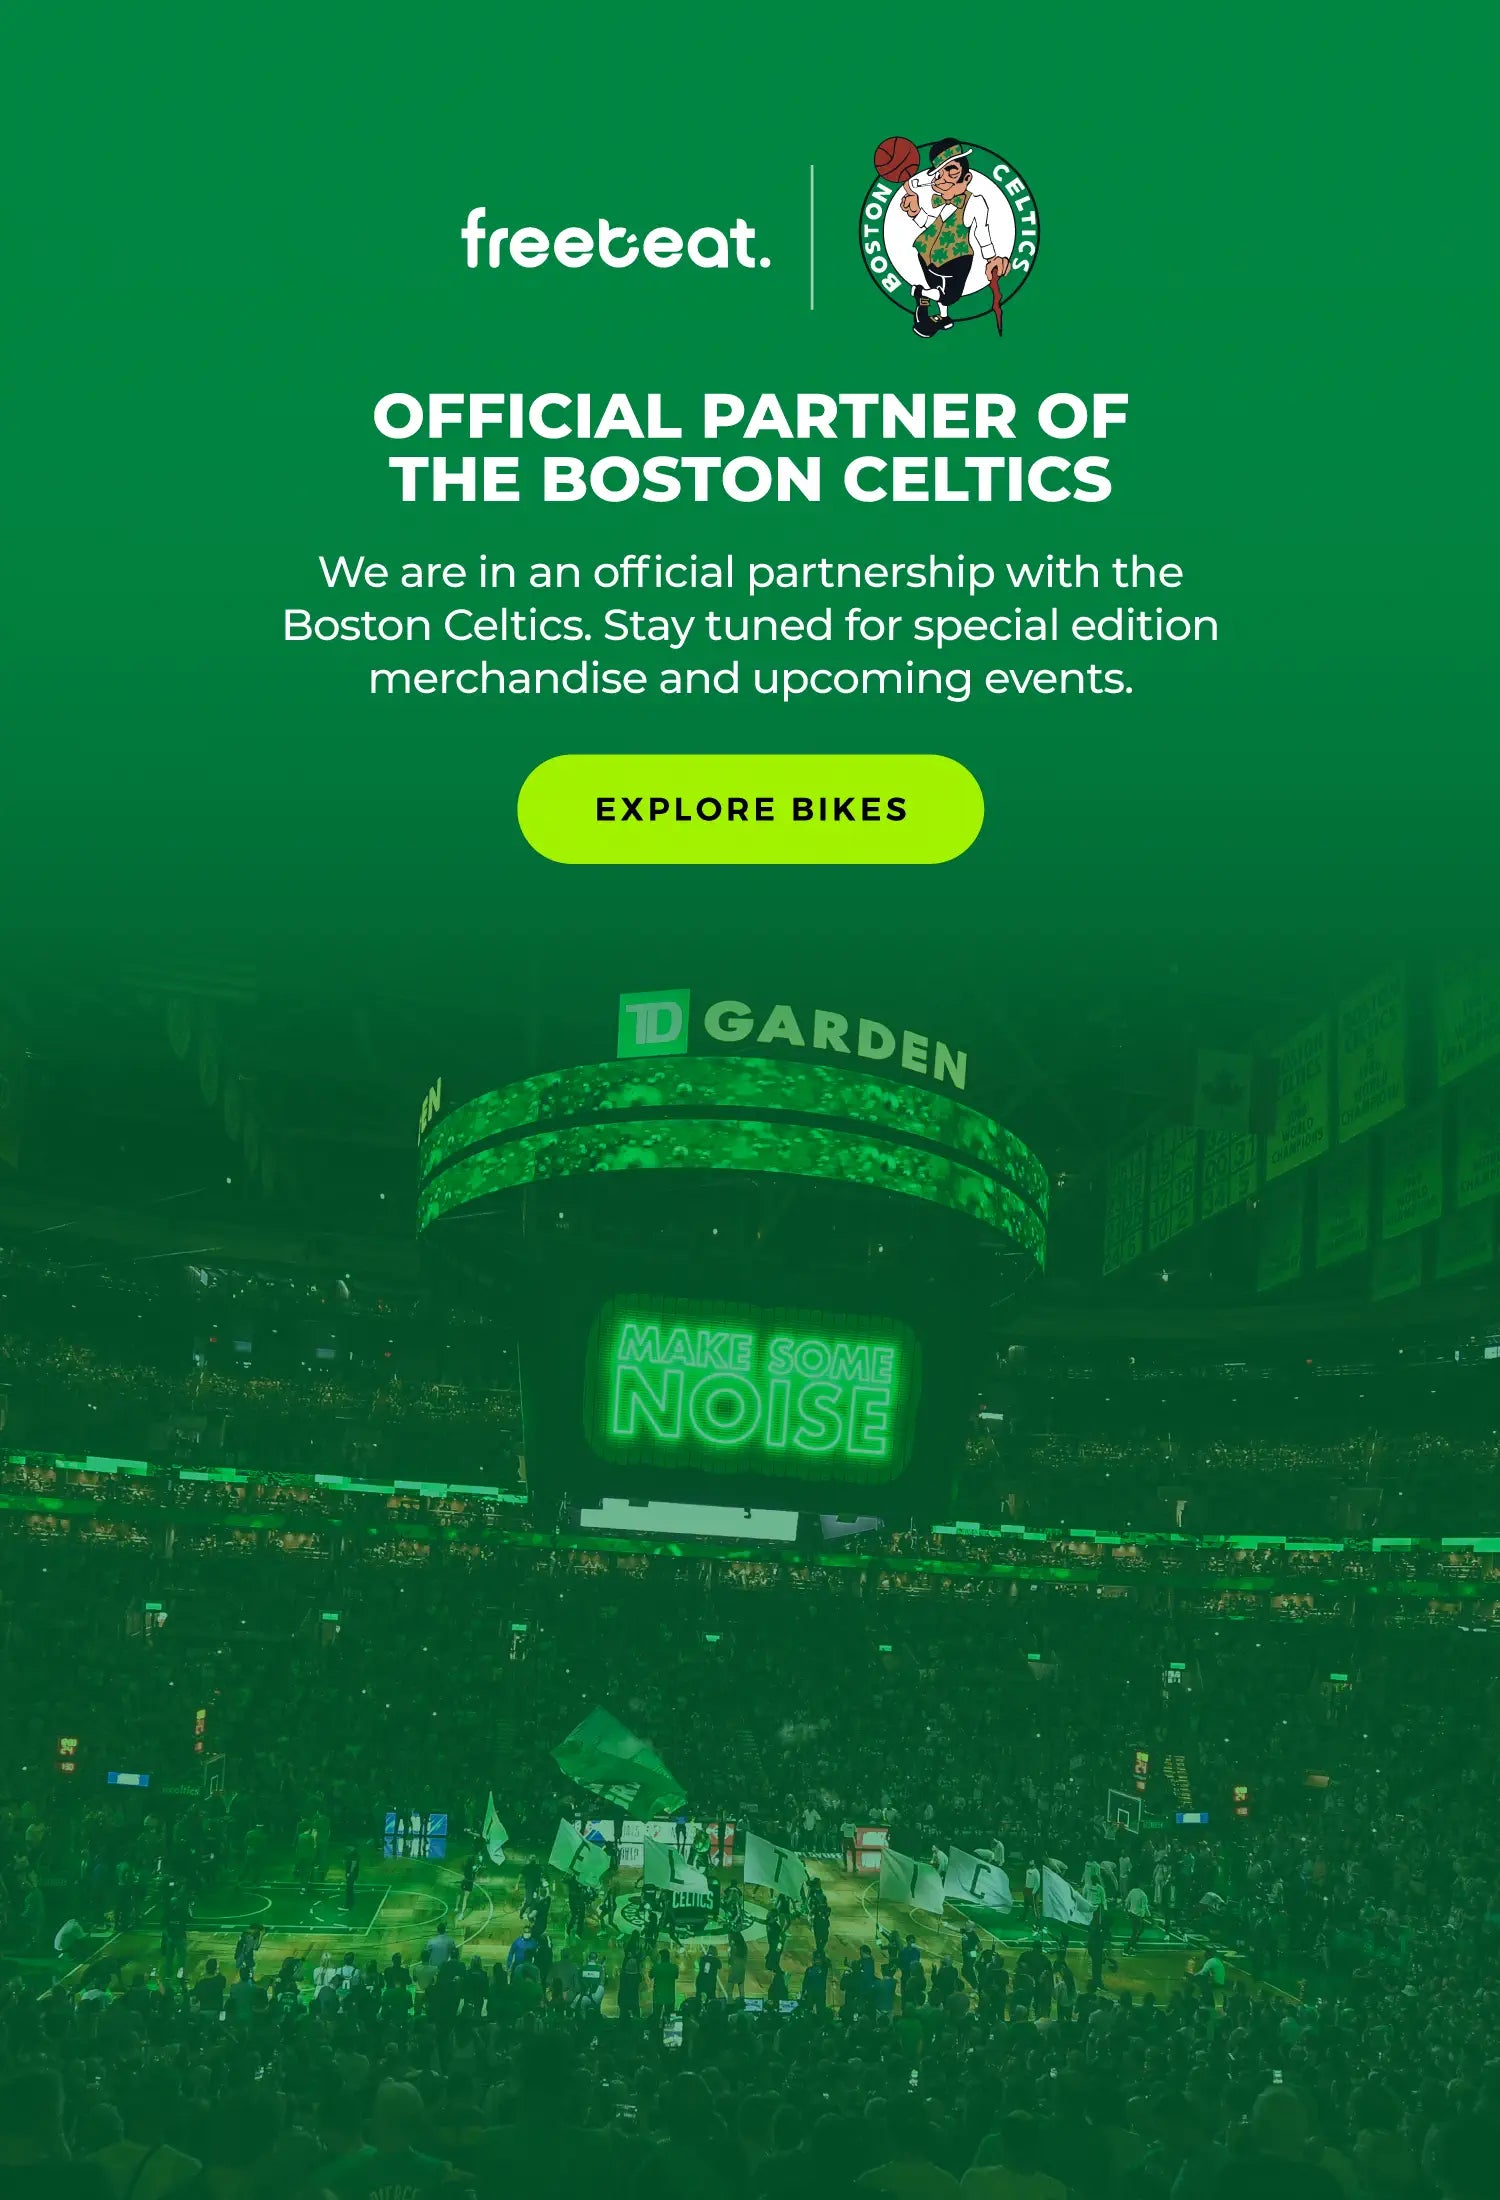 NBA Games: freebeat is the official partner of Boston Celtics